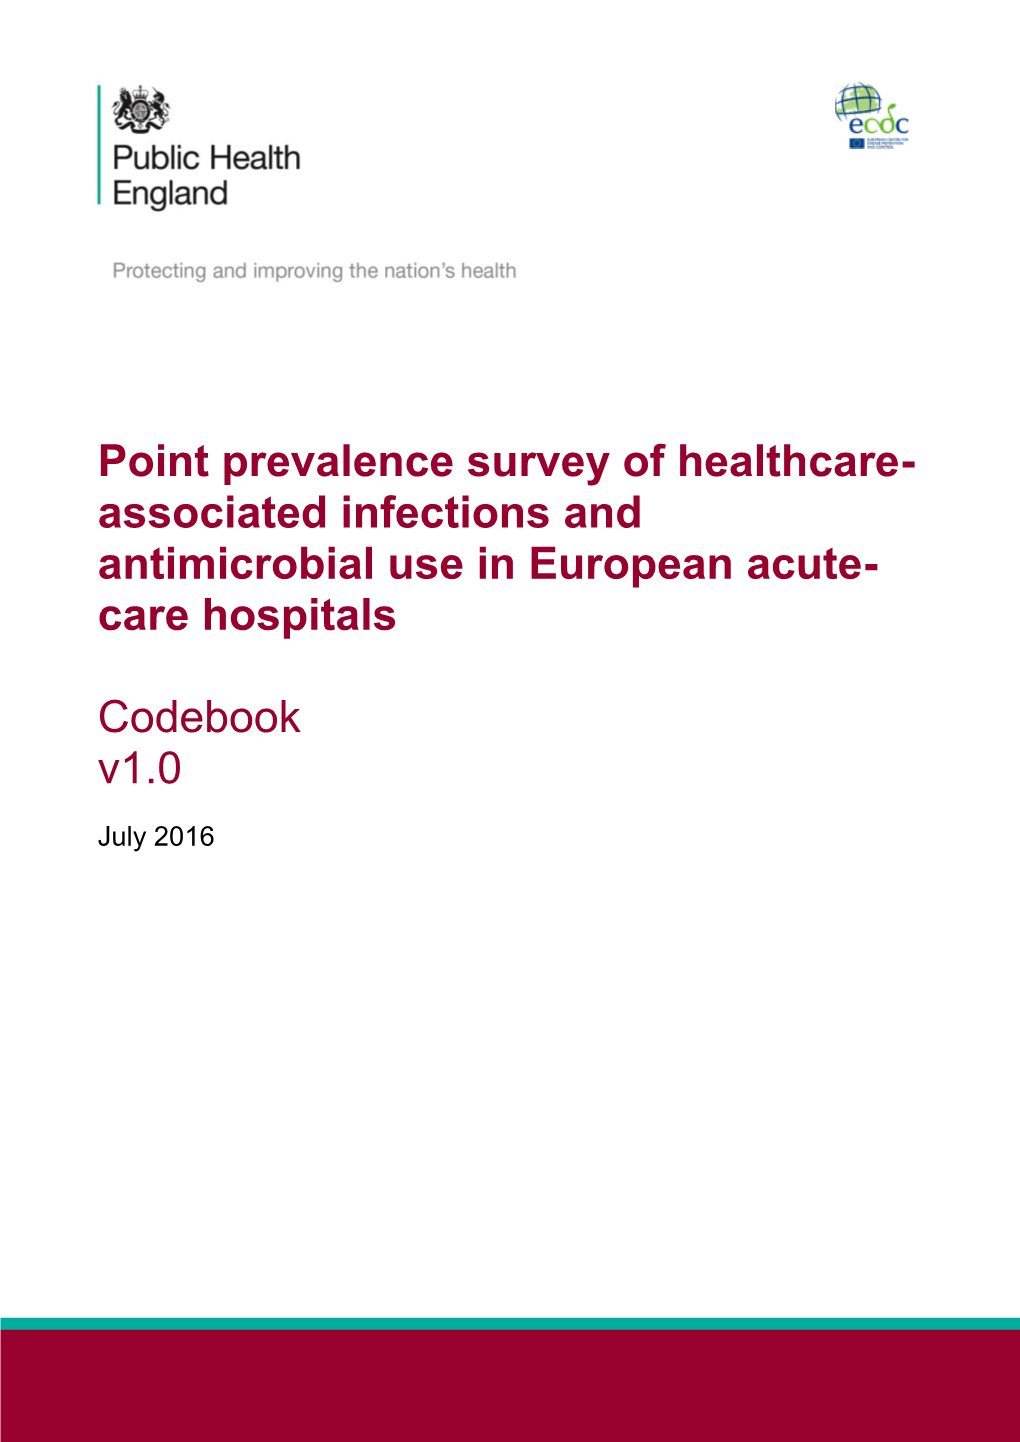 Point Prevalence Survey of Healthcare-Associated Infections and Antimicrobial Use in European Acute-Care Hospitals